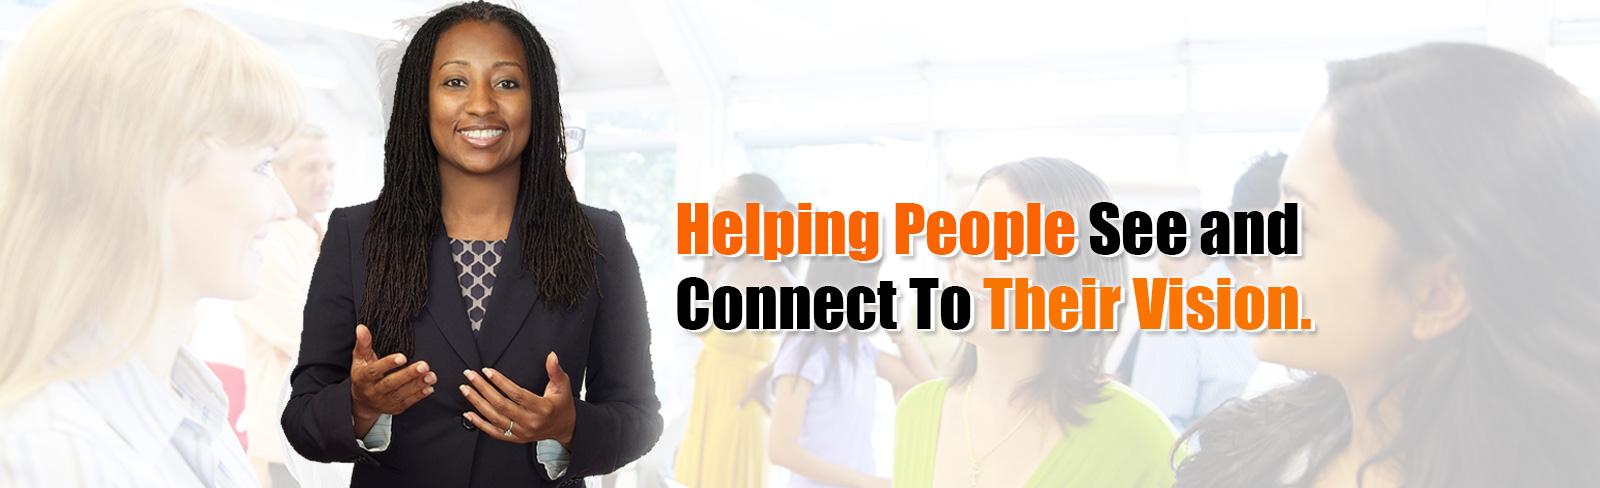 Helping People See and Connect To Their Vision.